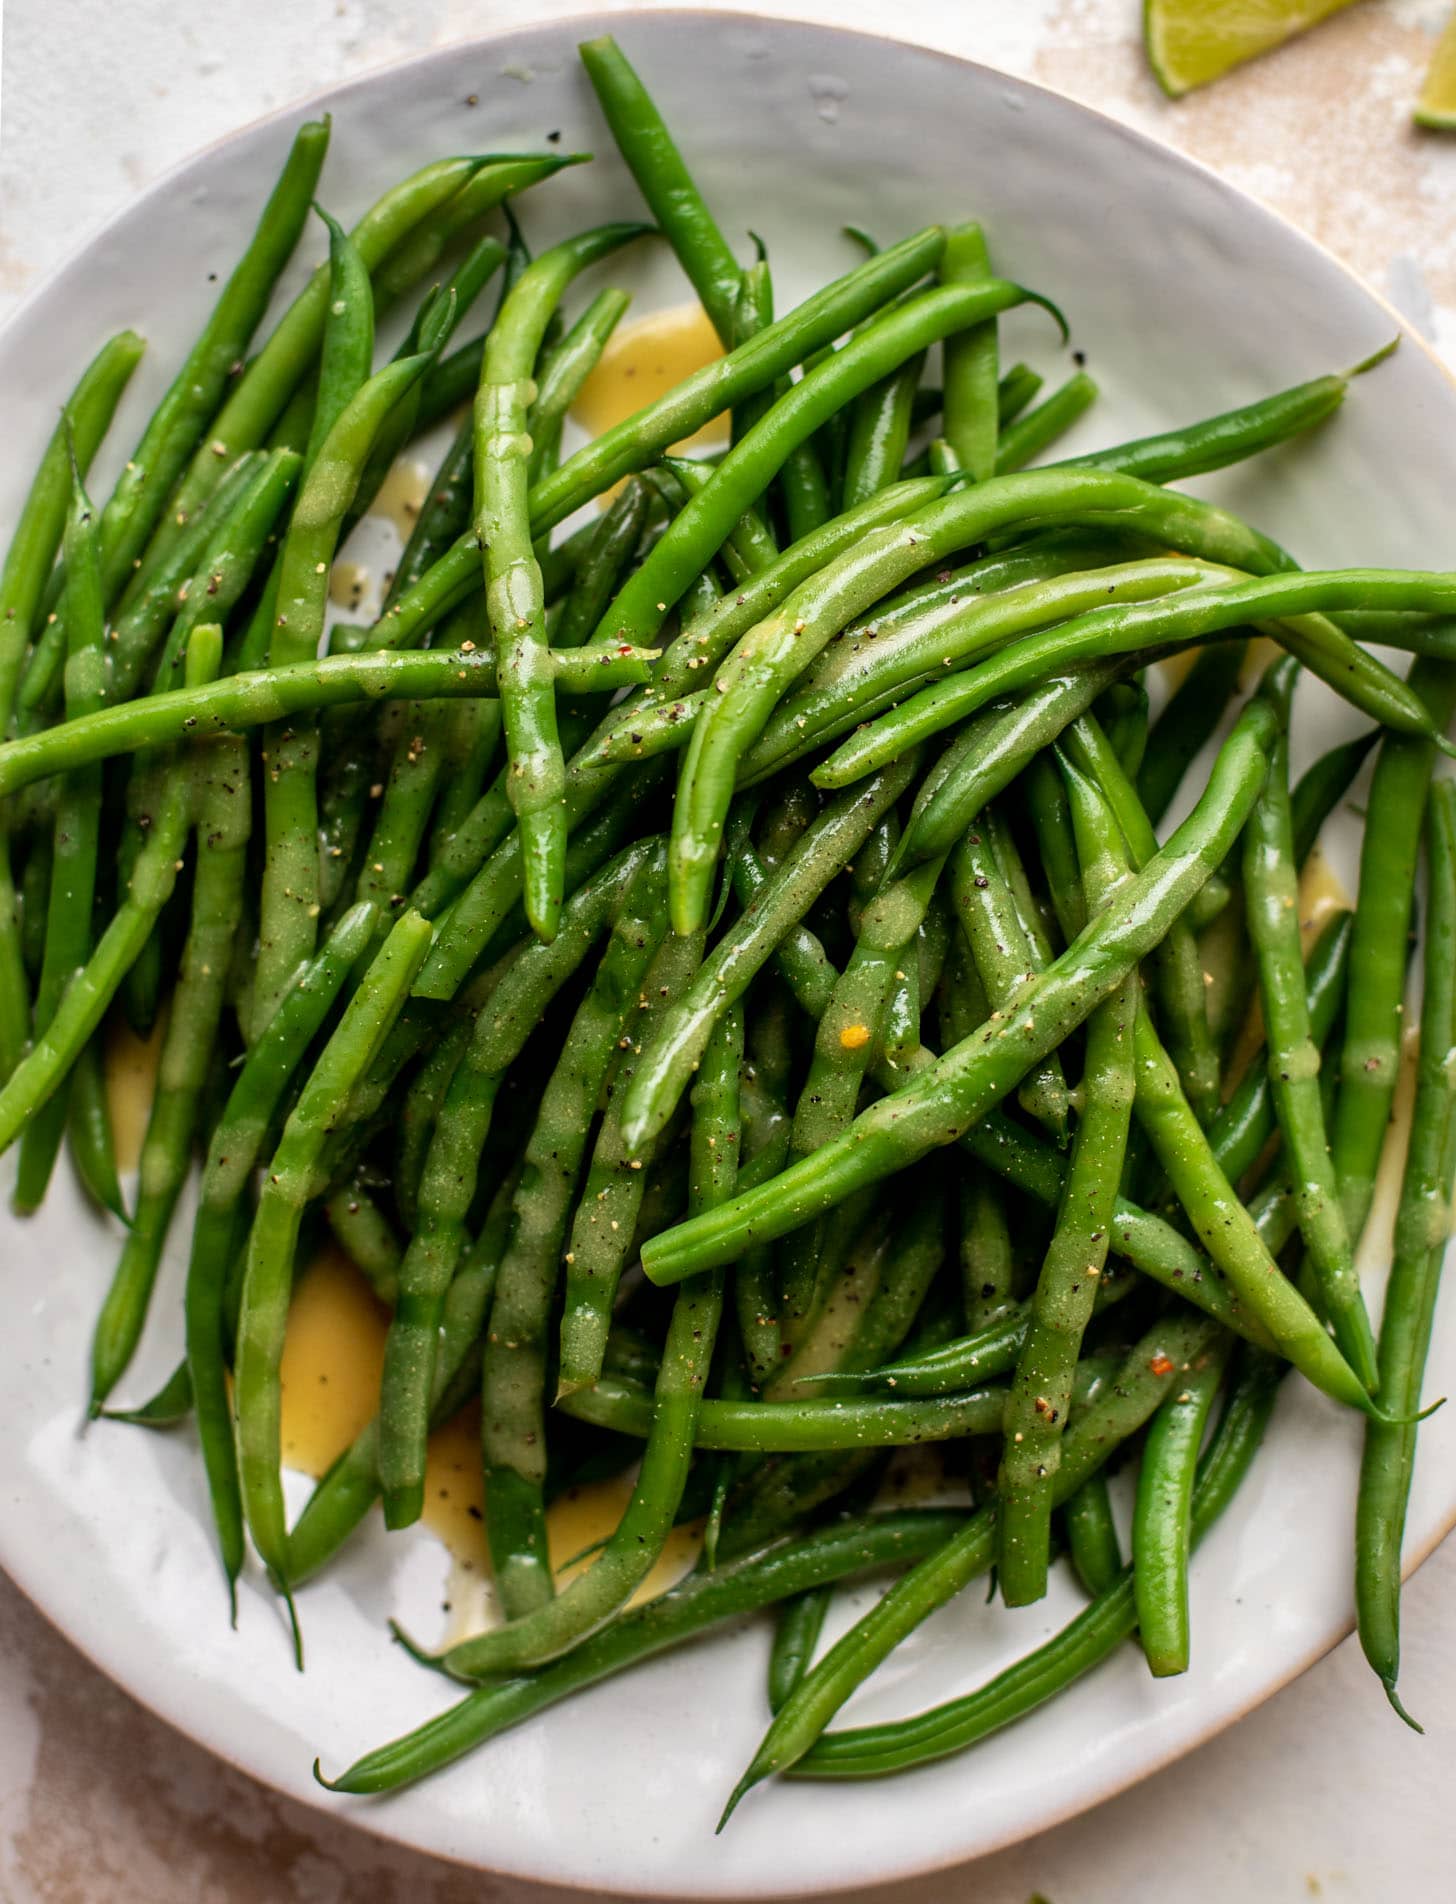 blanched green beans with peanut vinaigrette